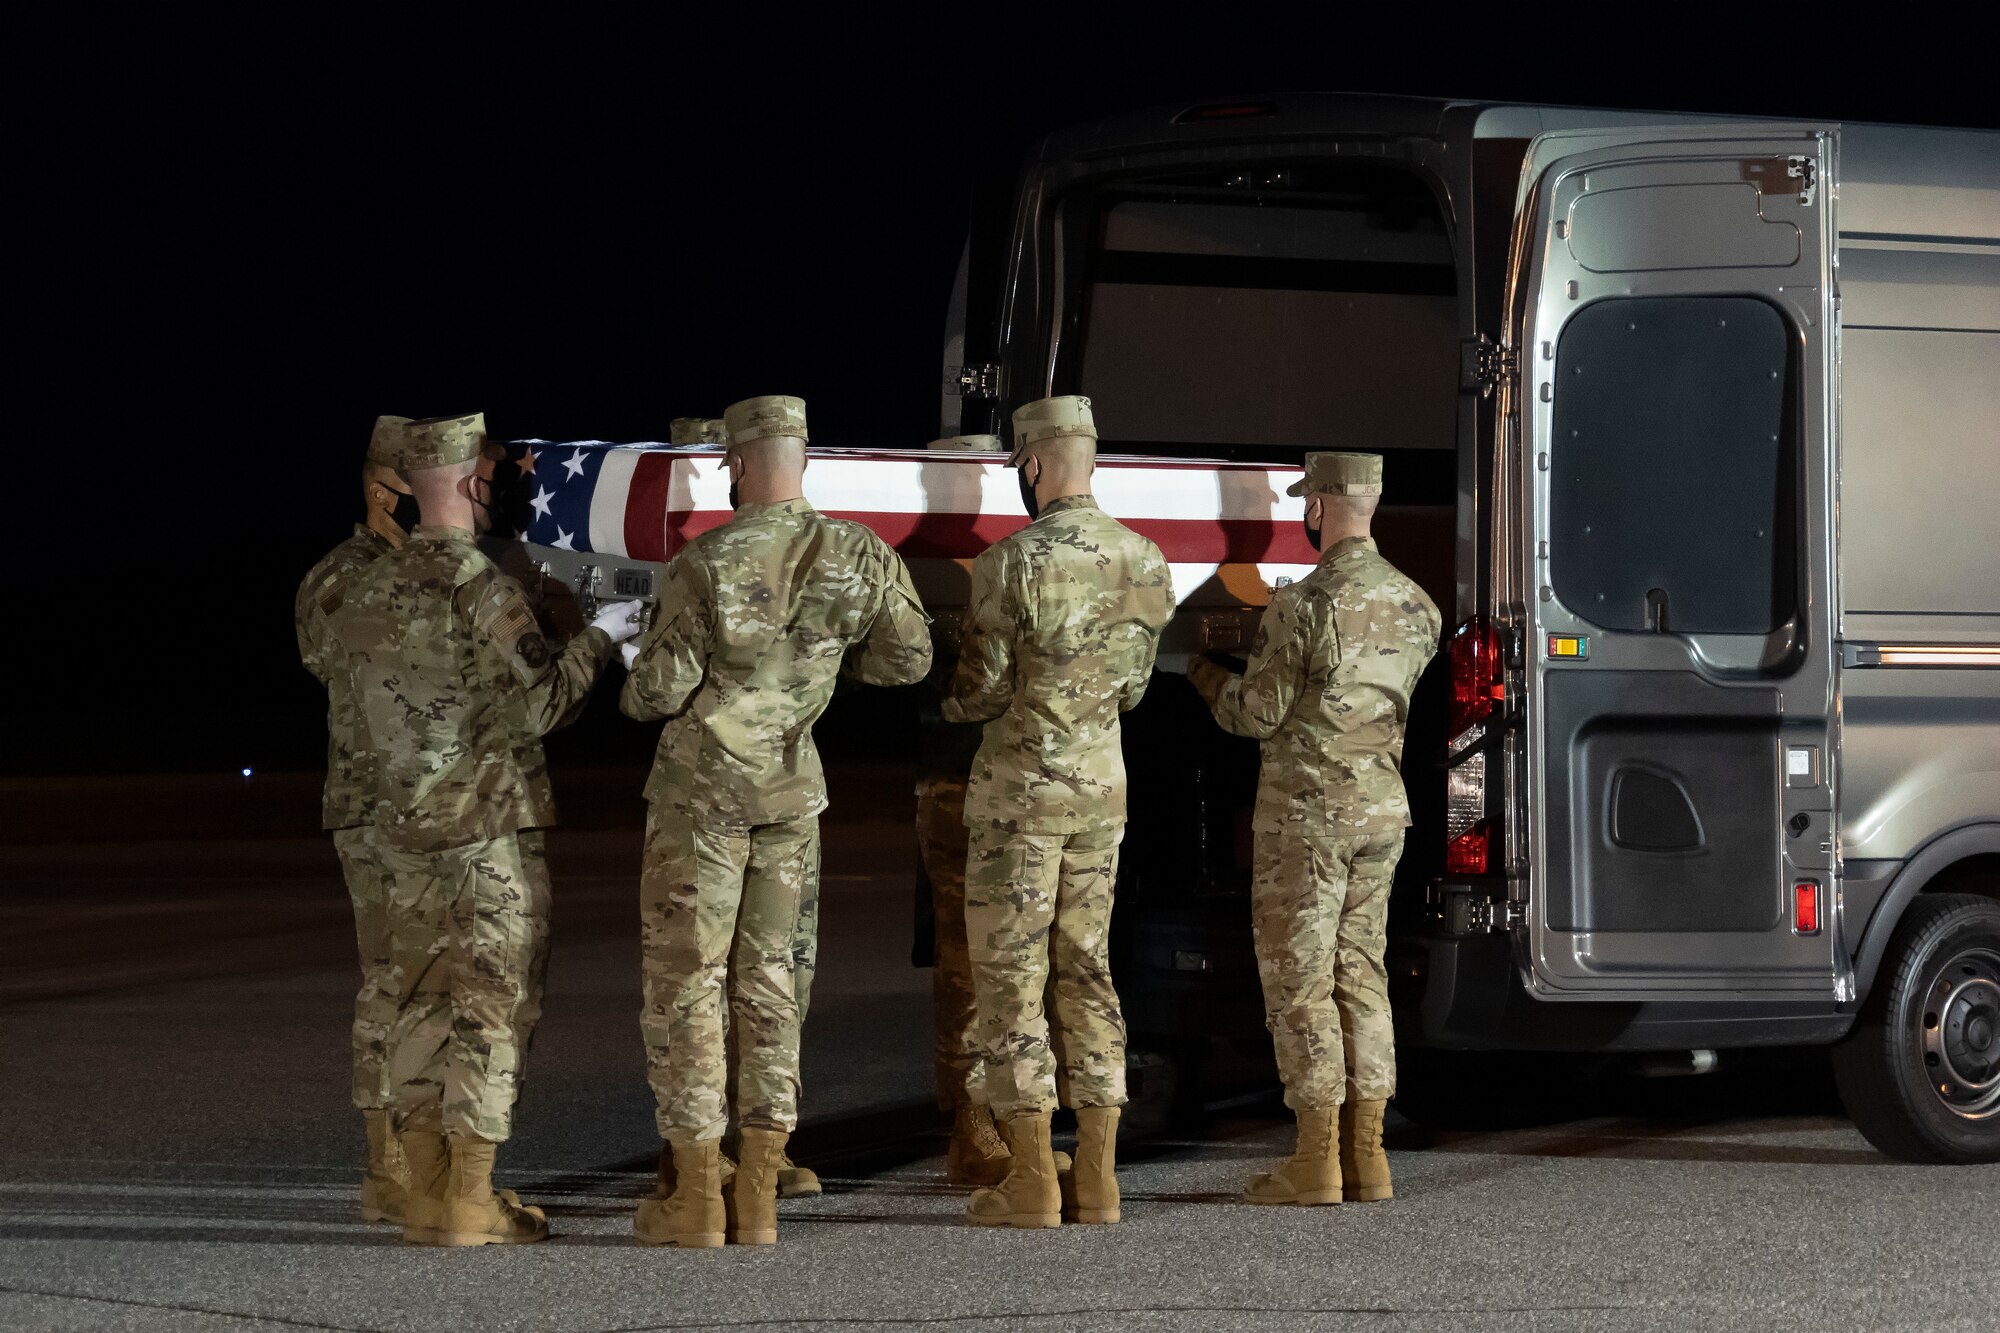 A U.S. Air Force carry team transfers the remains of Air Force Chief Master Sgt. Tresse Z. King of Raeford, North Carolina, August 6, 2021 at Dover Air Force Base, Delaware. King was assigned to the 96th Force Support Squadron, Eglin Air Force Base, Florida. (U.S. Air Force photo by Jason Minto)